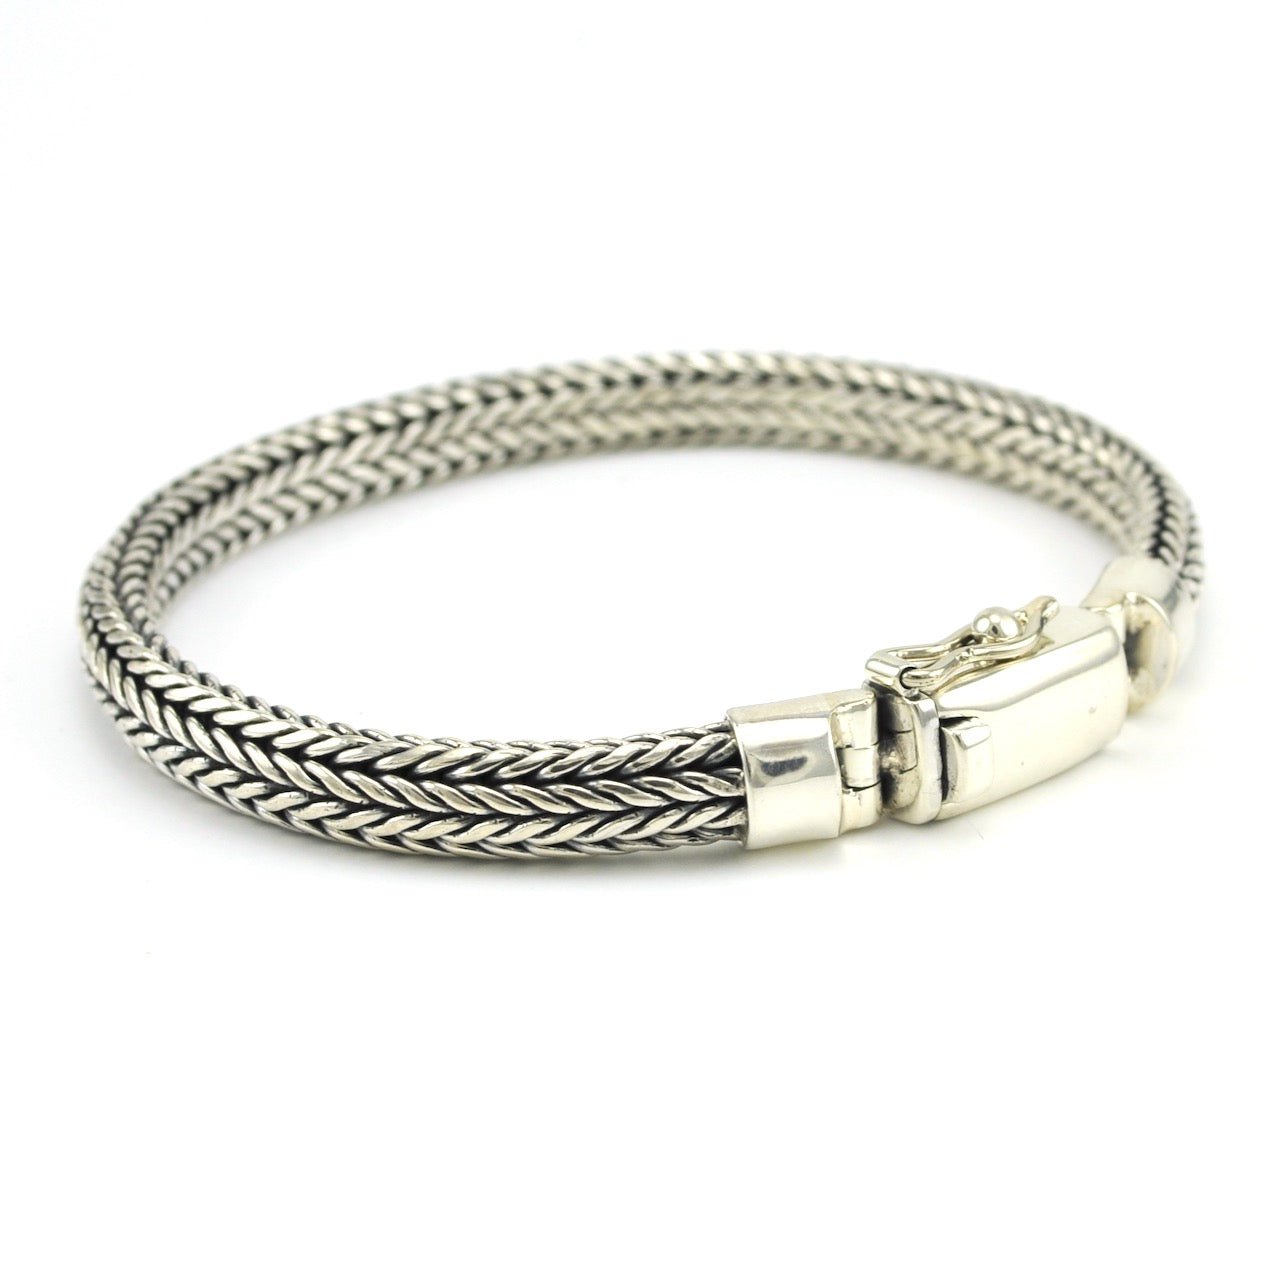 Buy LeCalla 925 Sterling Silver BIS Hallmarked Italian Snake Chain Bracelet  for Women and Girls 6.5 Inches at Amazon.in